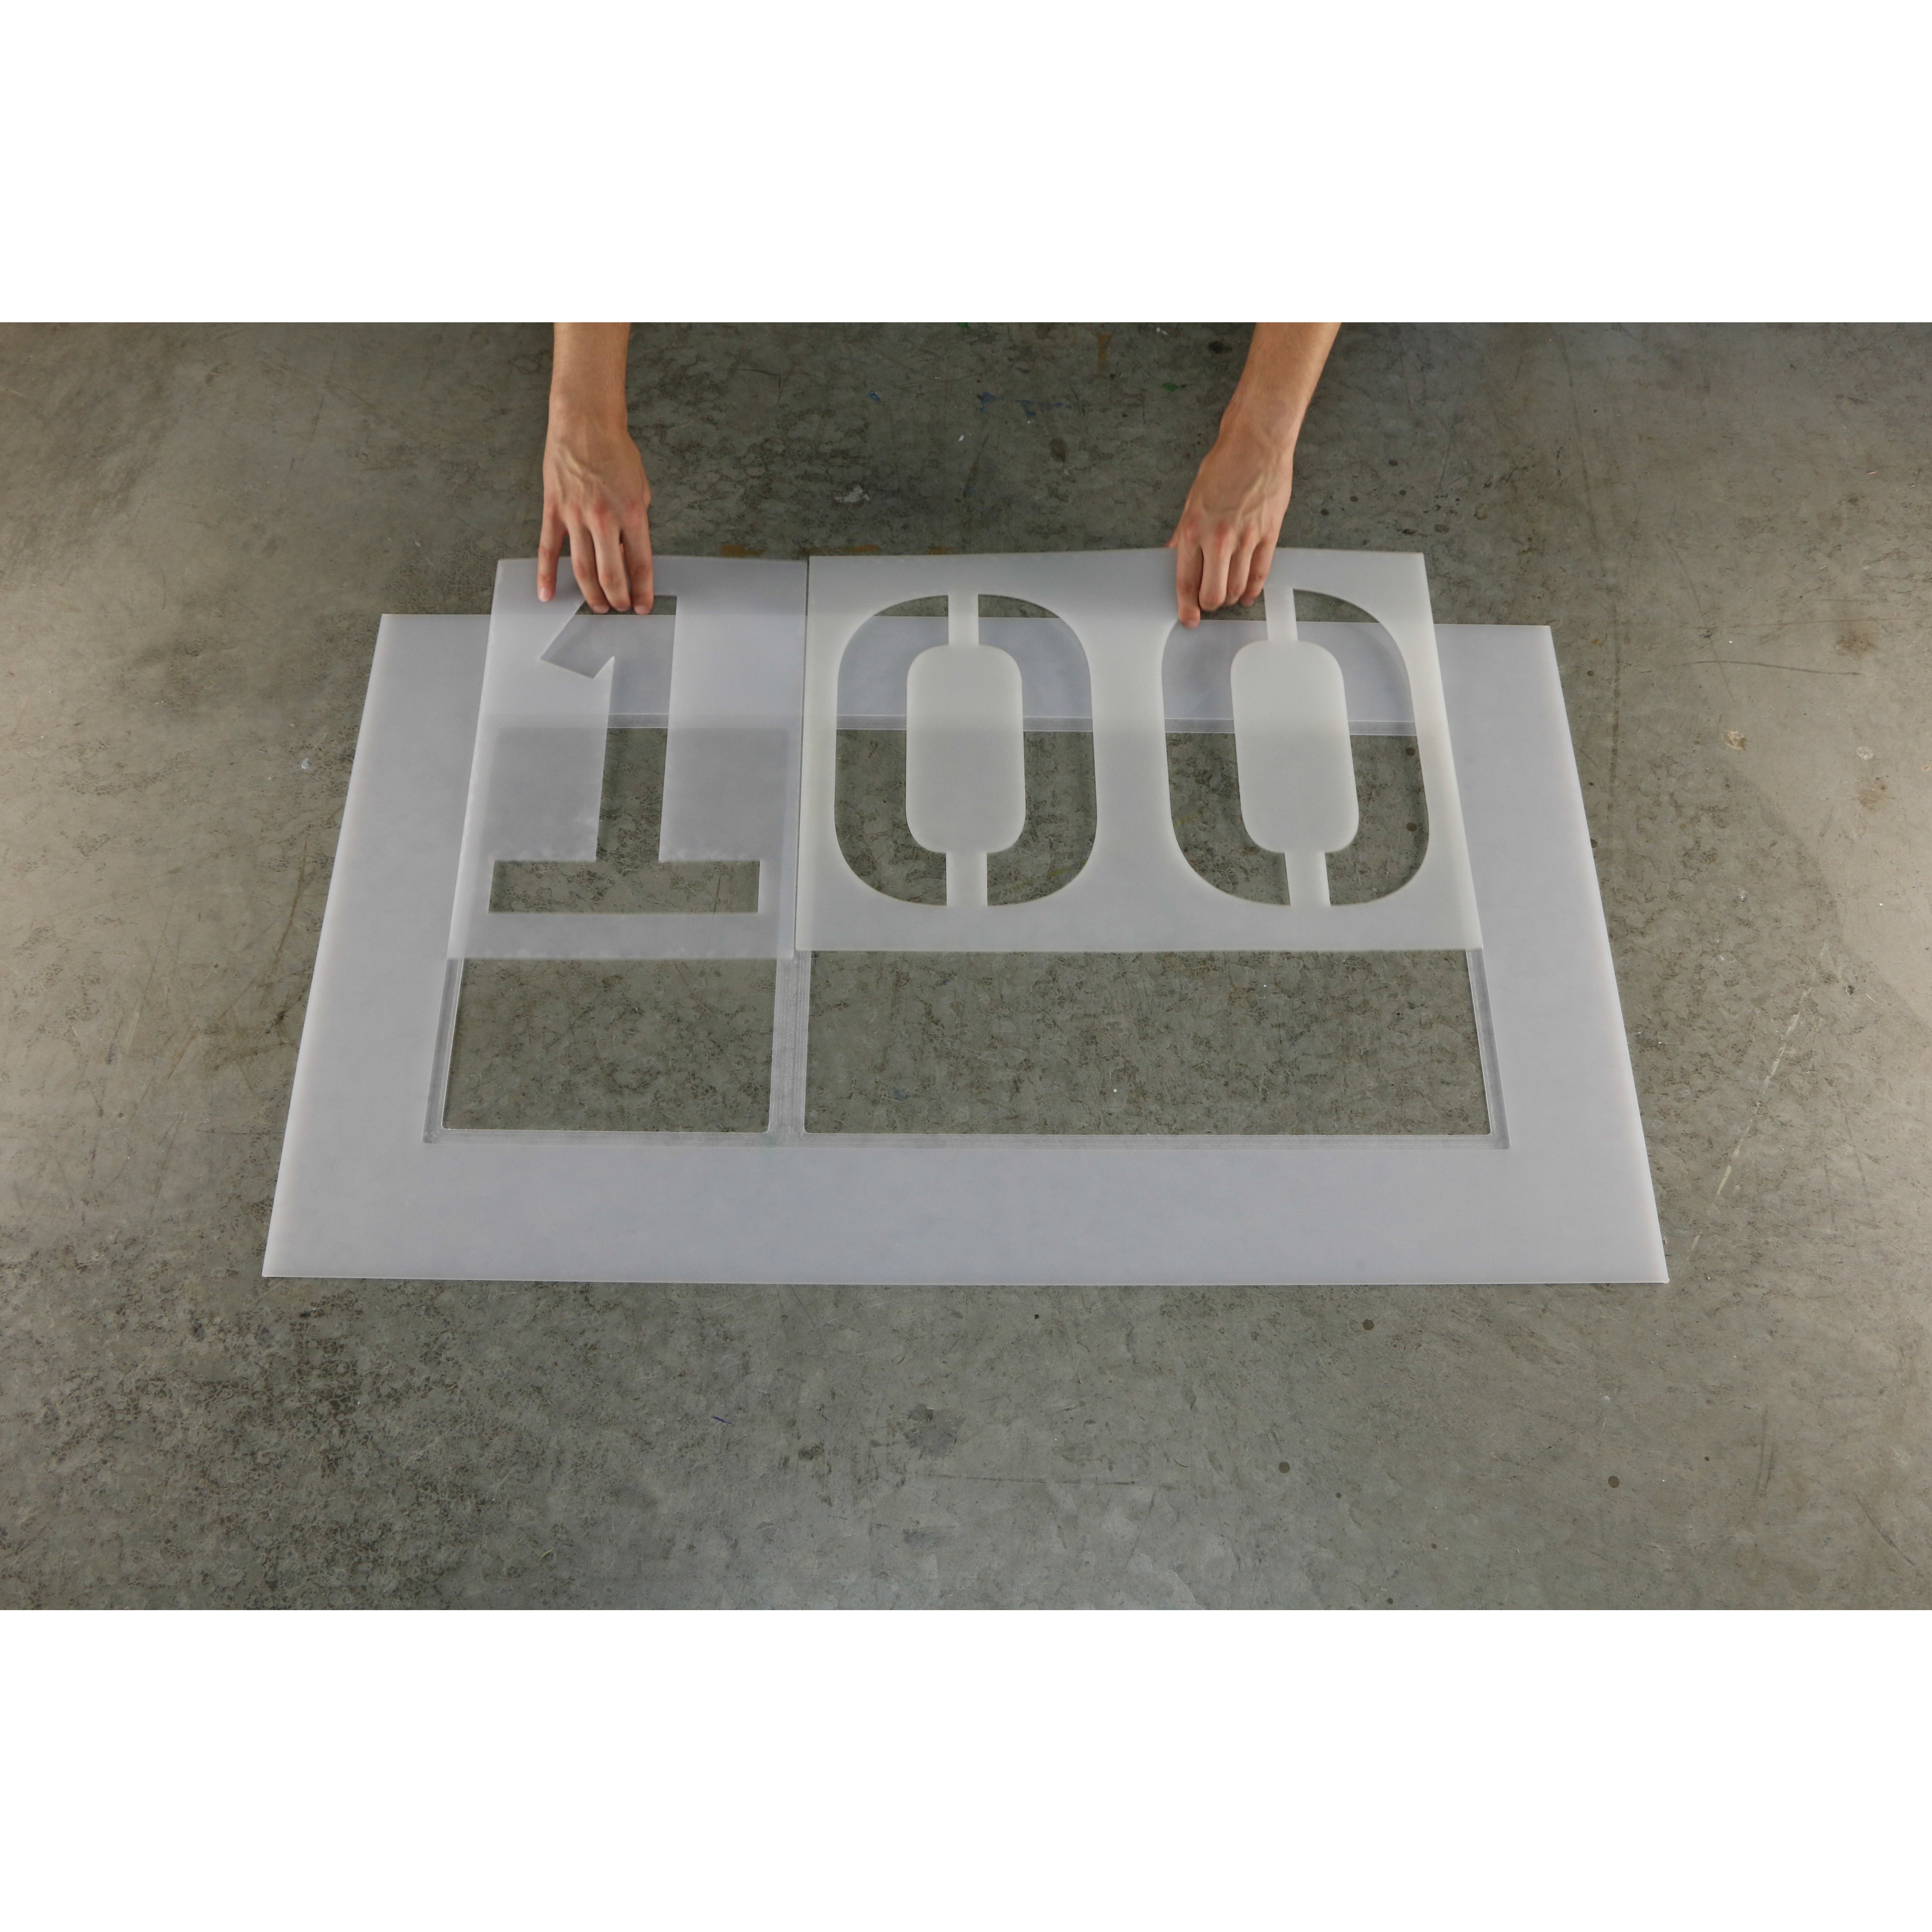 Number Stencils - Large Number Stencils for Painting, Every Digit